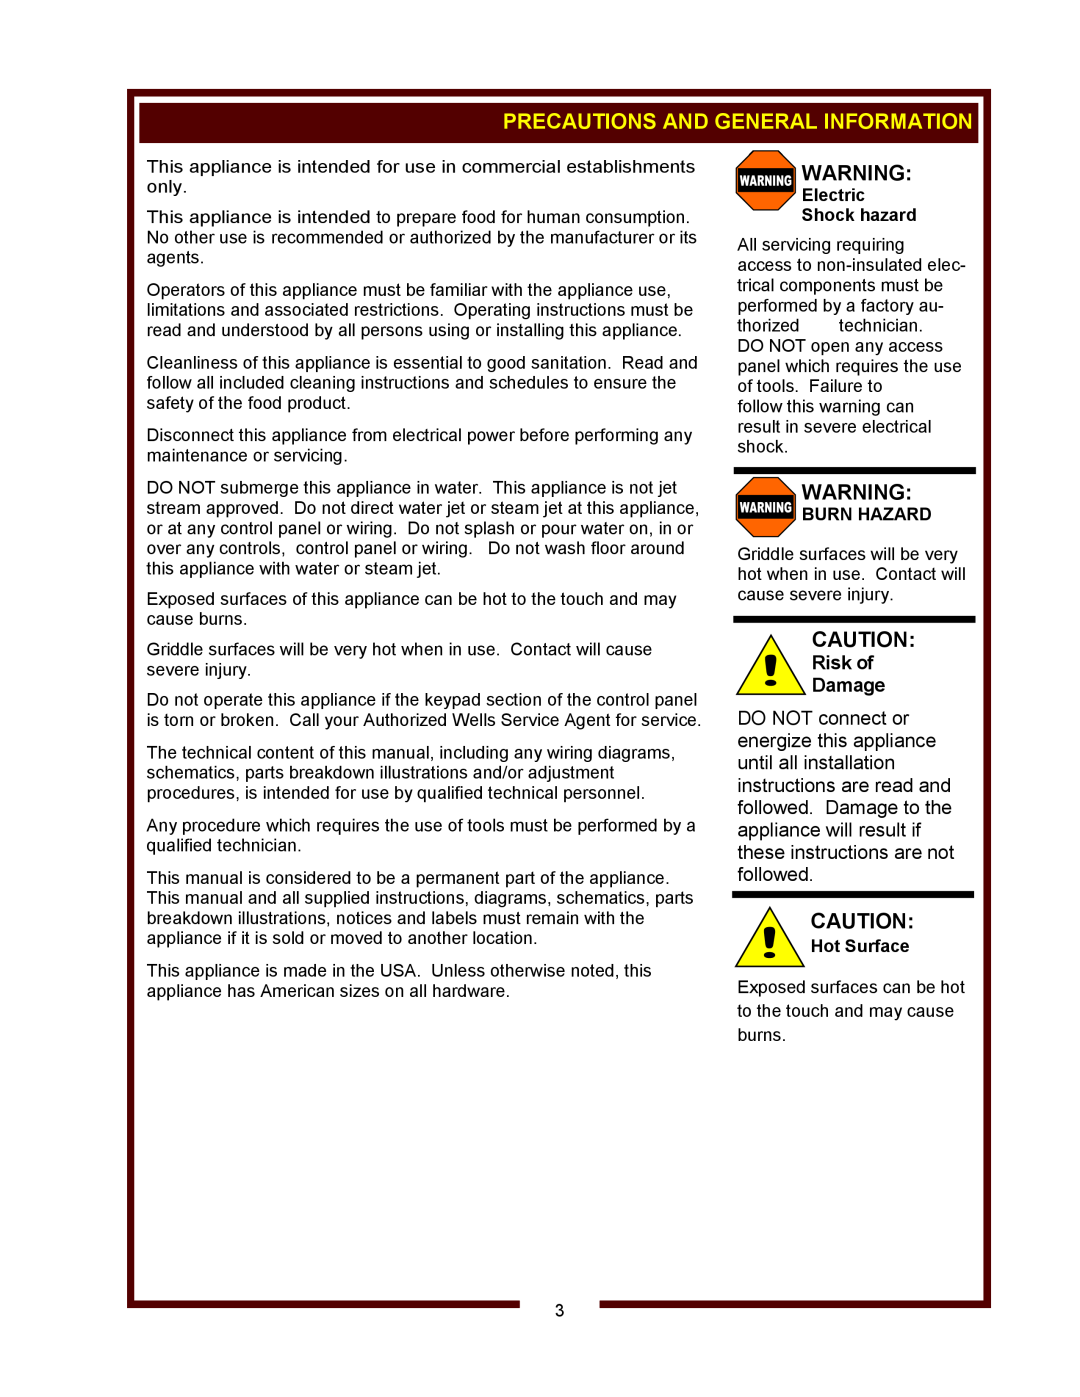 Wells FT-18 operation manual Precautions And General Information, Risk of Damage 